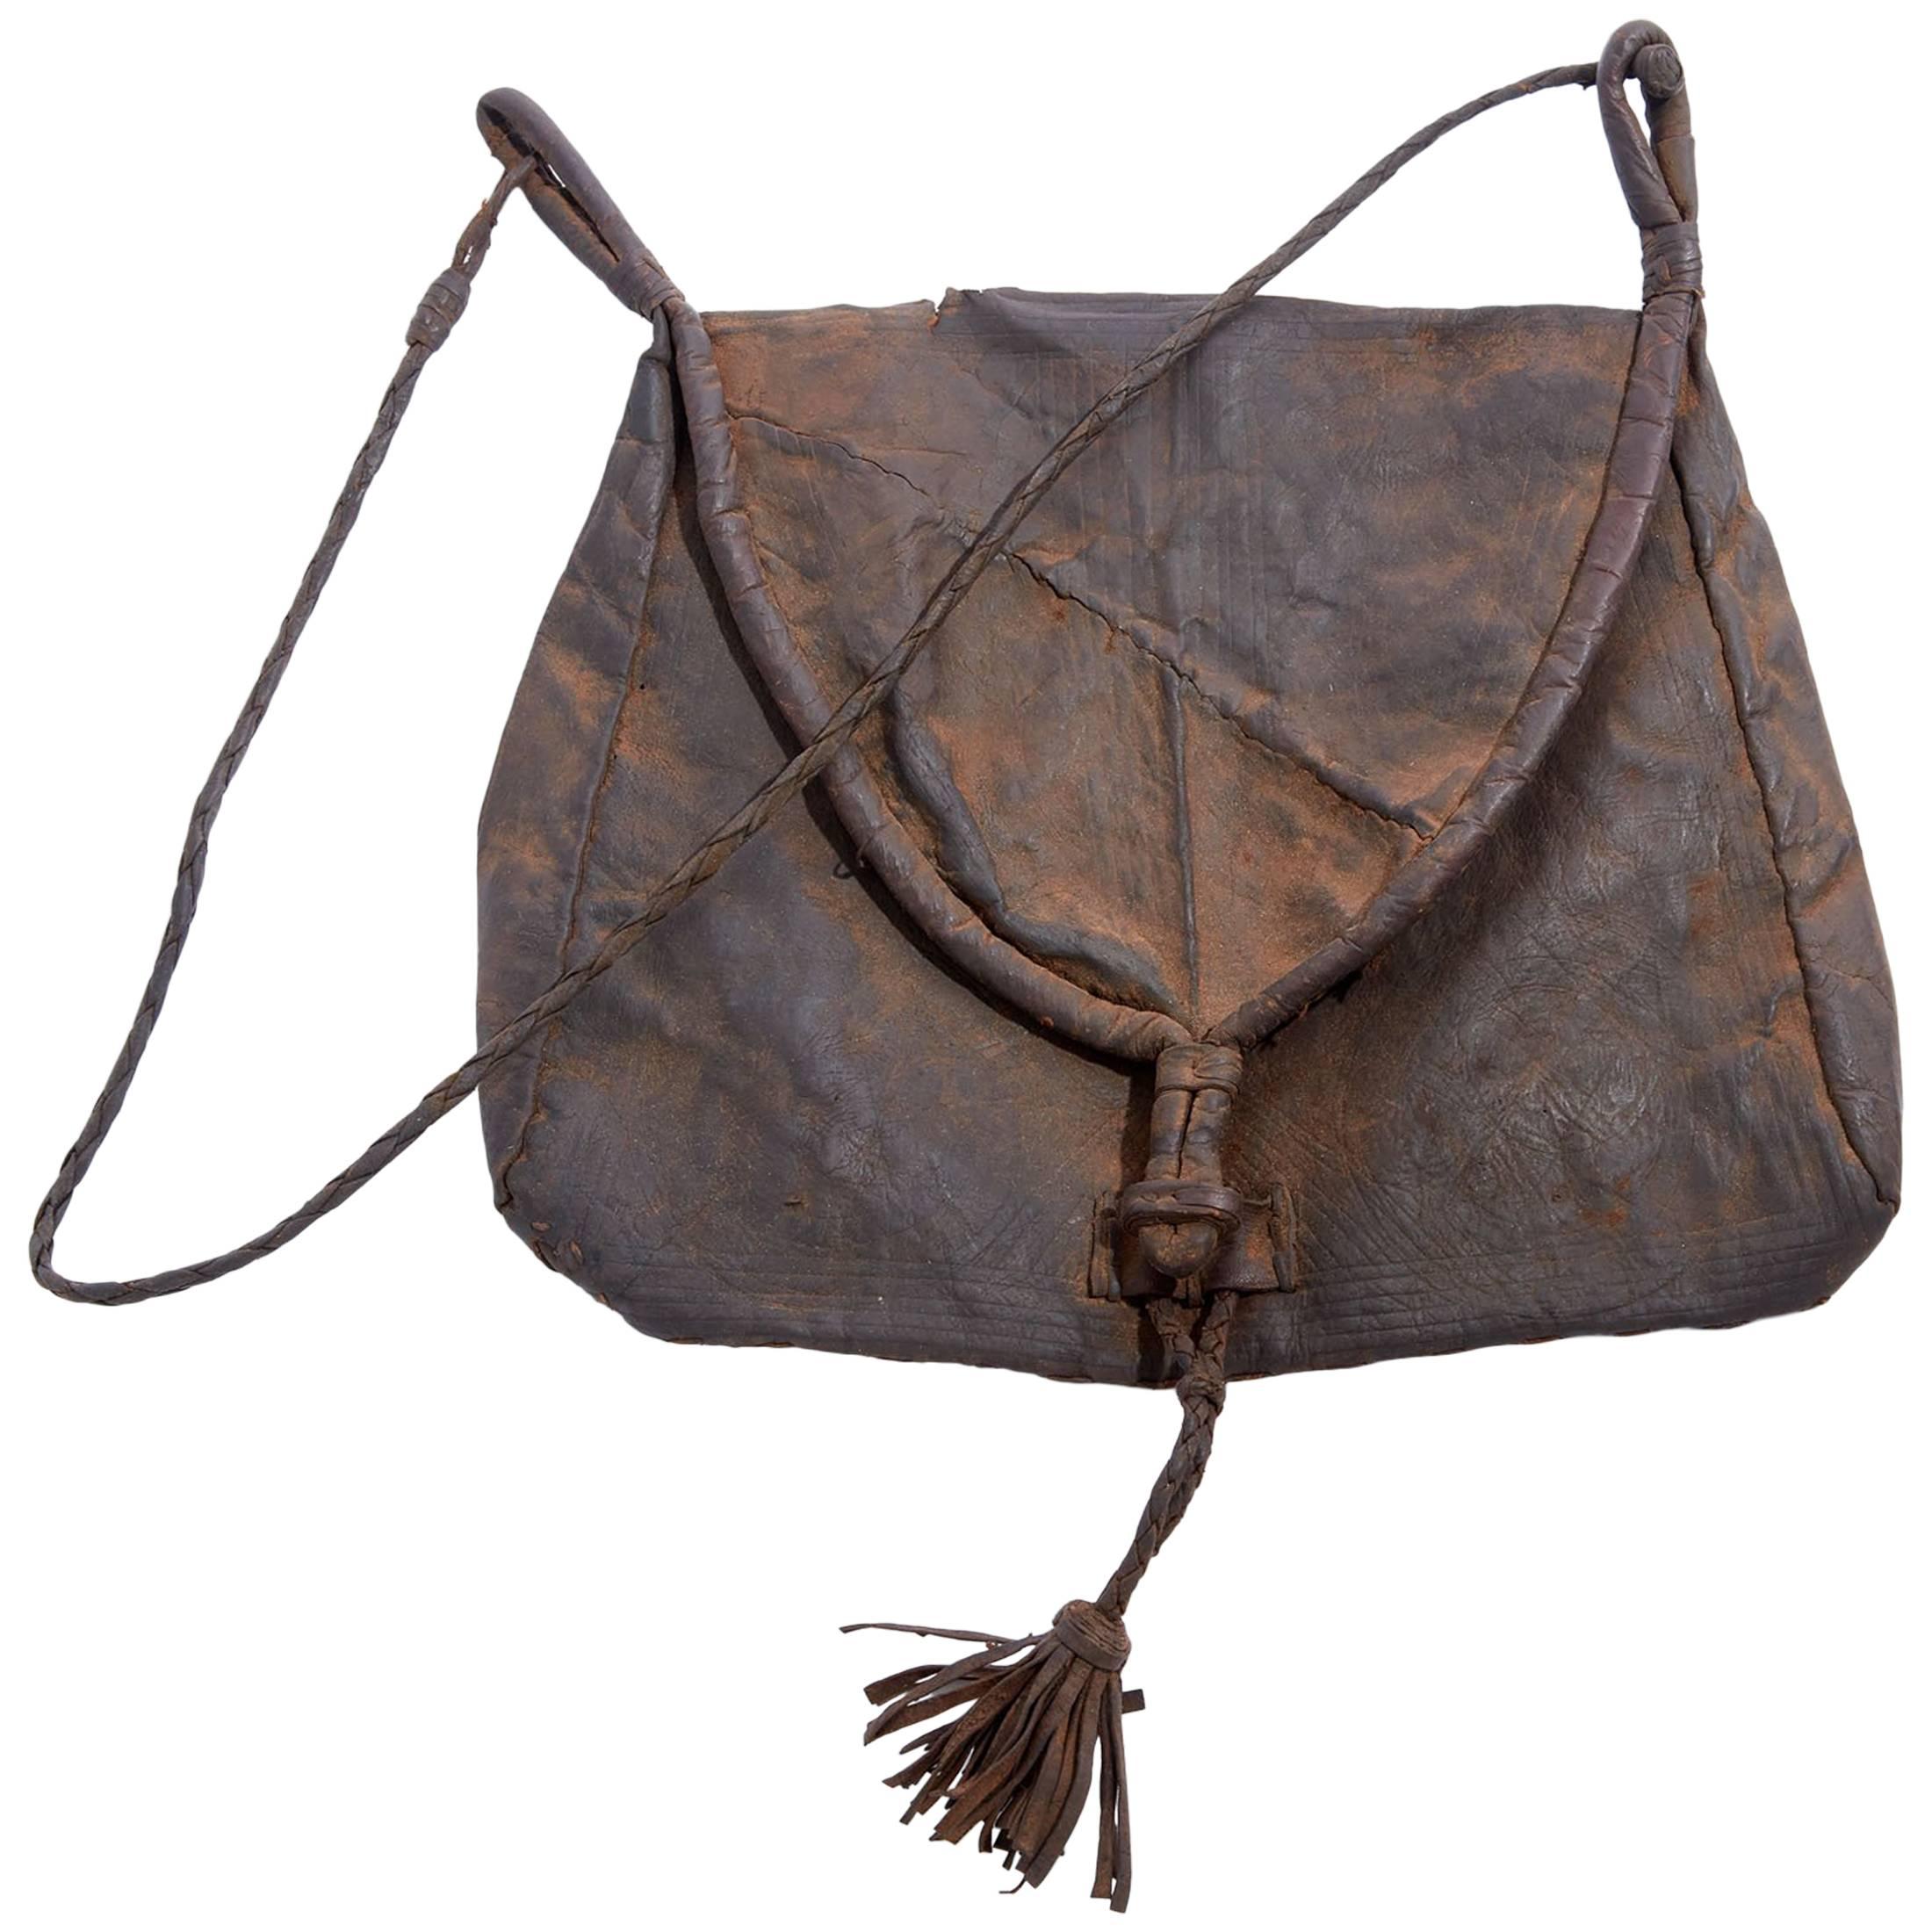 Early 20th Century Afghani Leather Bag